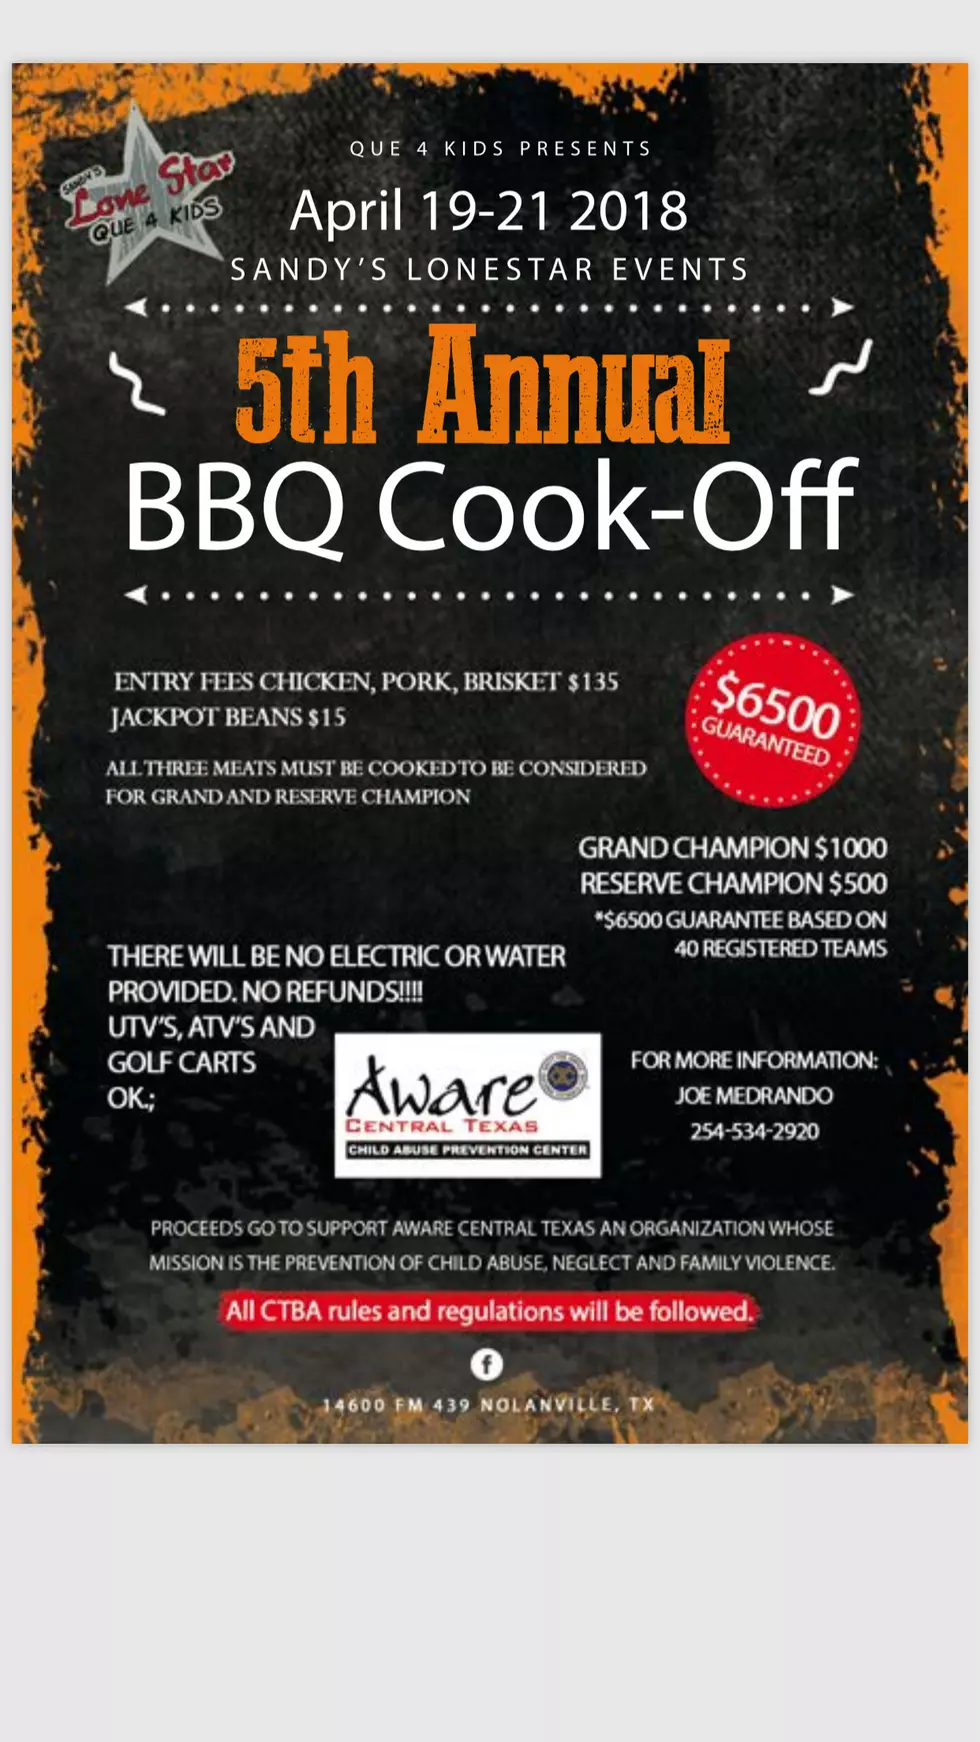 Calling All Grill Masters For The 5th Annual BBQ Cook-Off